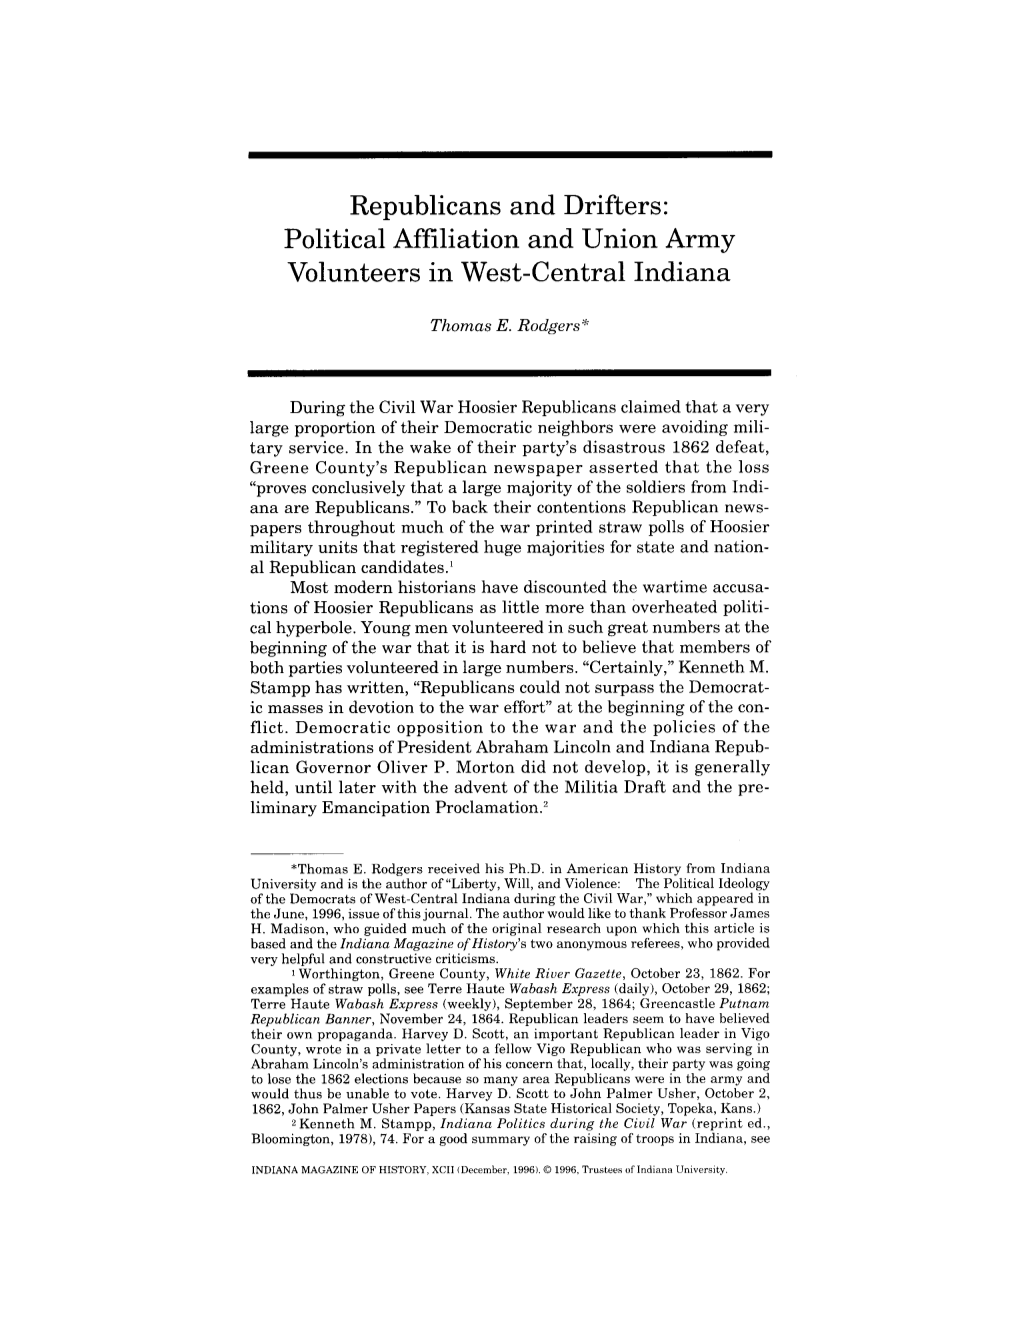 Republicans and Drifters: Political Affiliation and Union Army Volunteers in West-Central Indiana